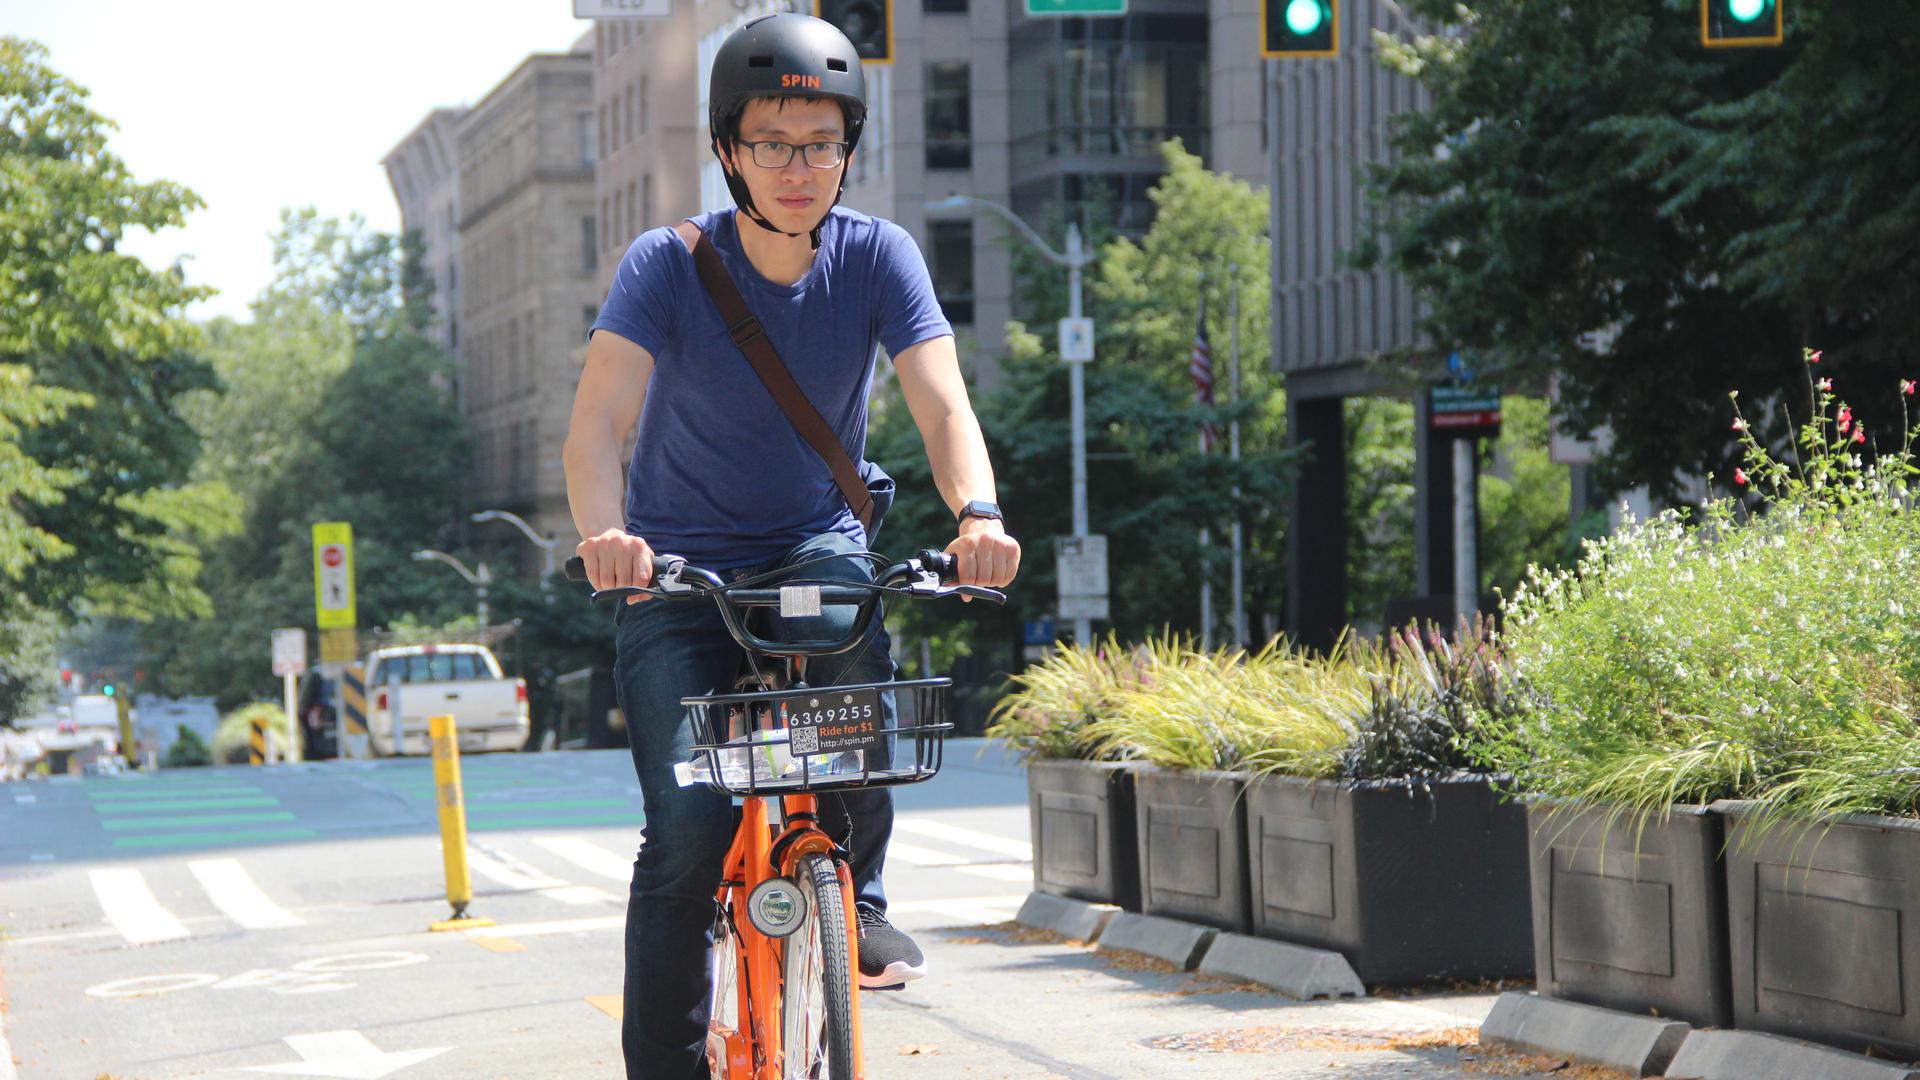 Derrick Ko, co-founder and CEO of Spin, rides one of his bikes in downtown Seattle. Spin currently has a permit to place 500 ride share bikes in Seattle.Derrick Ko, co-founder and CEO of Spin, rides one of his bikes in downtown Seattle. Spin currently has